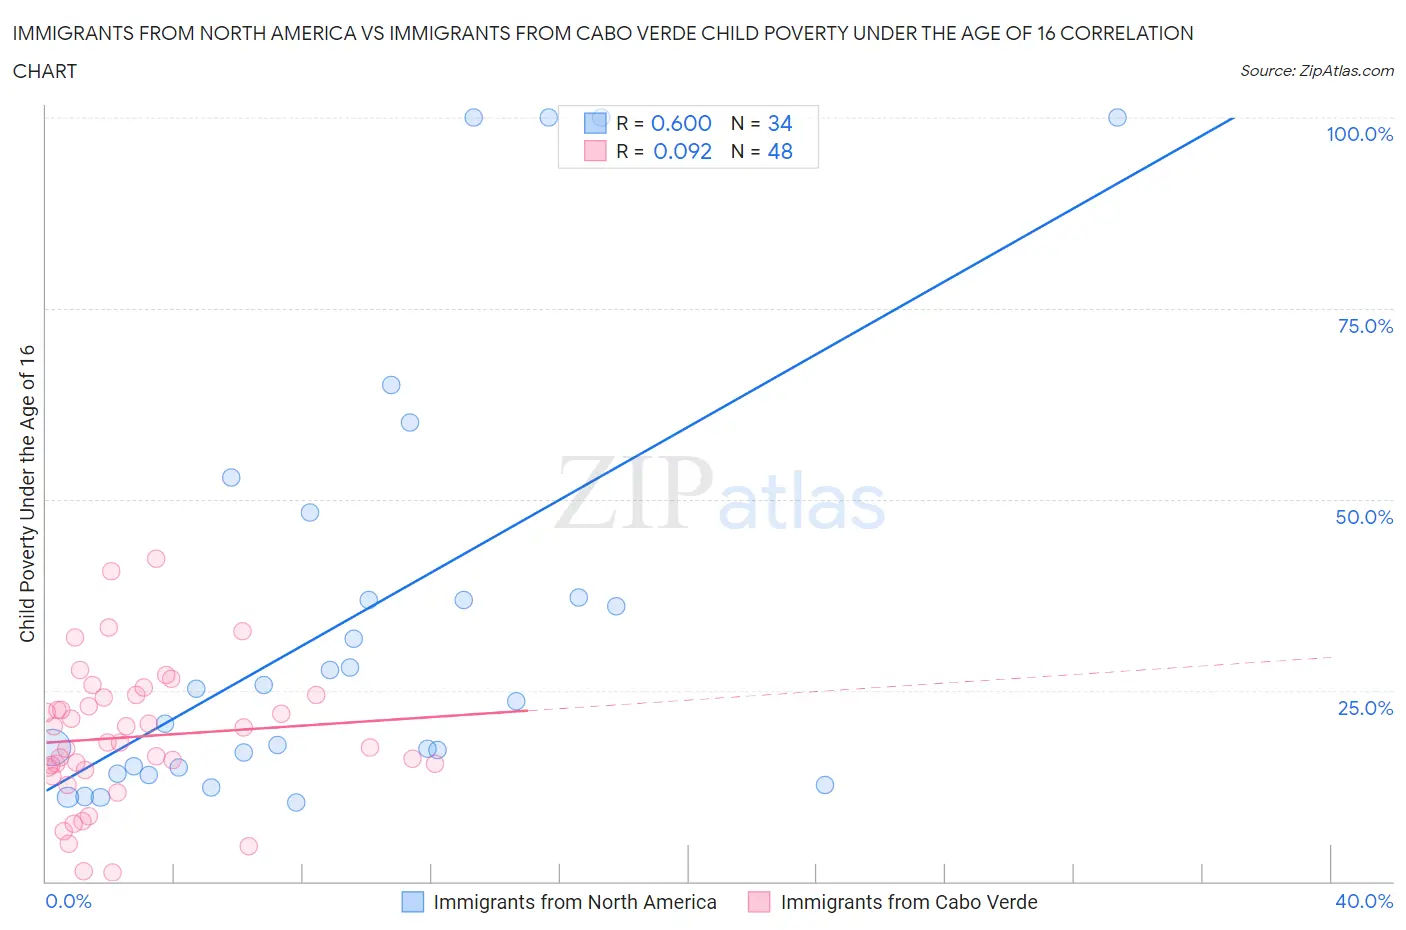 Immigrants from North America vs Immigrants from Cabo Verde Child Poverty Under the Age of 16